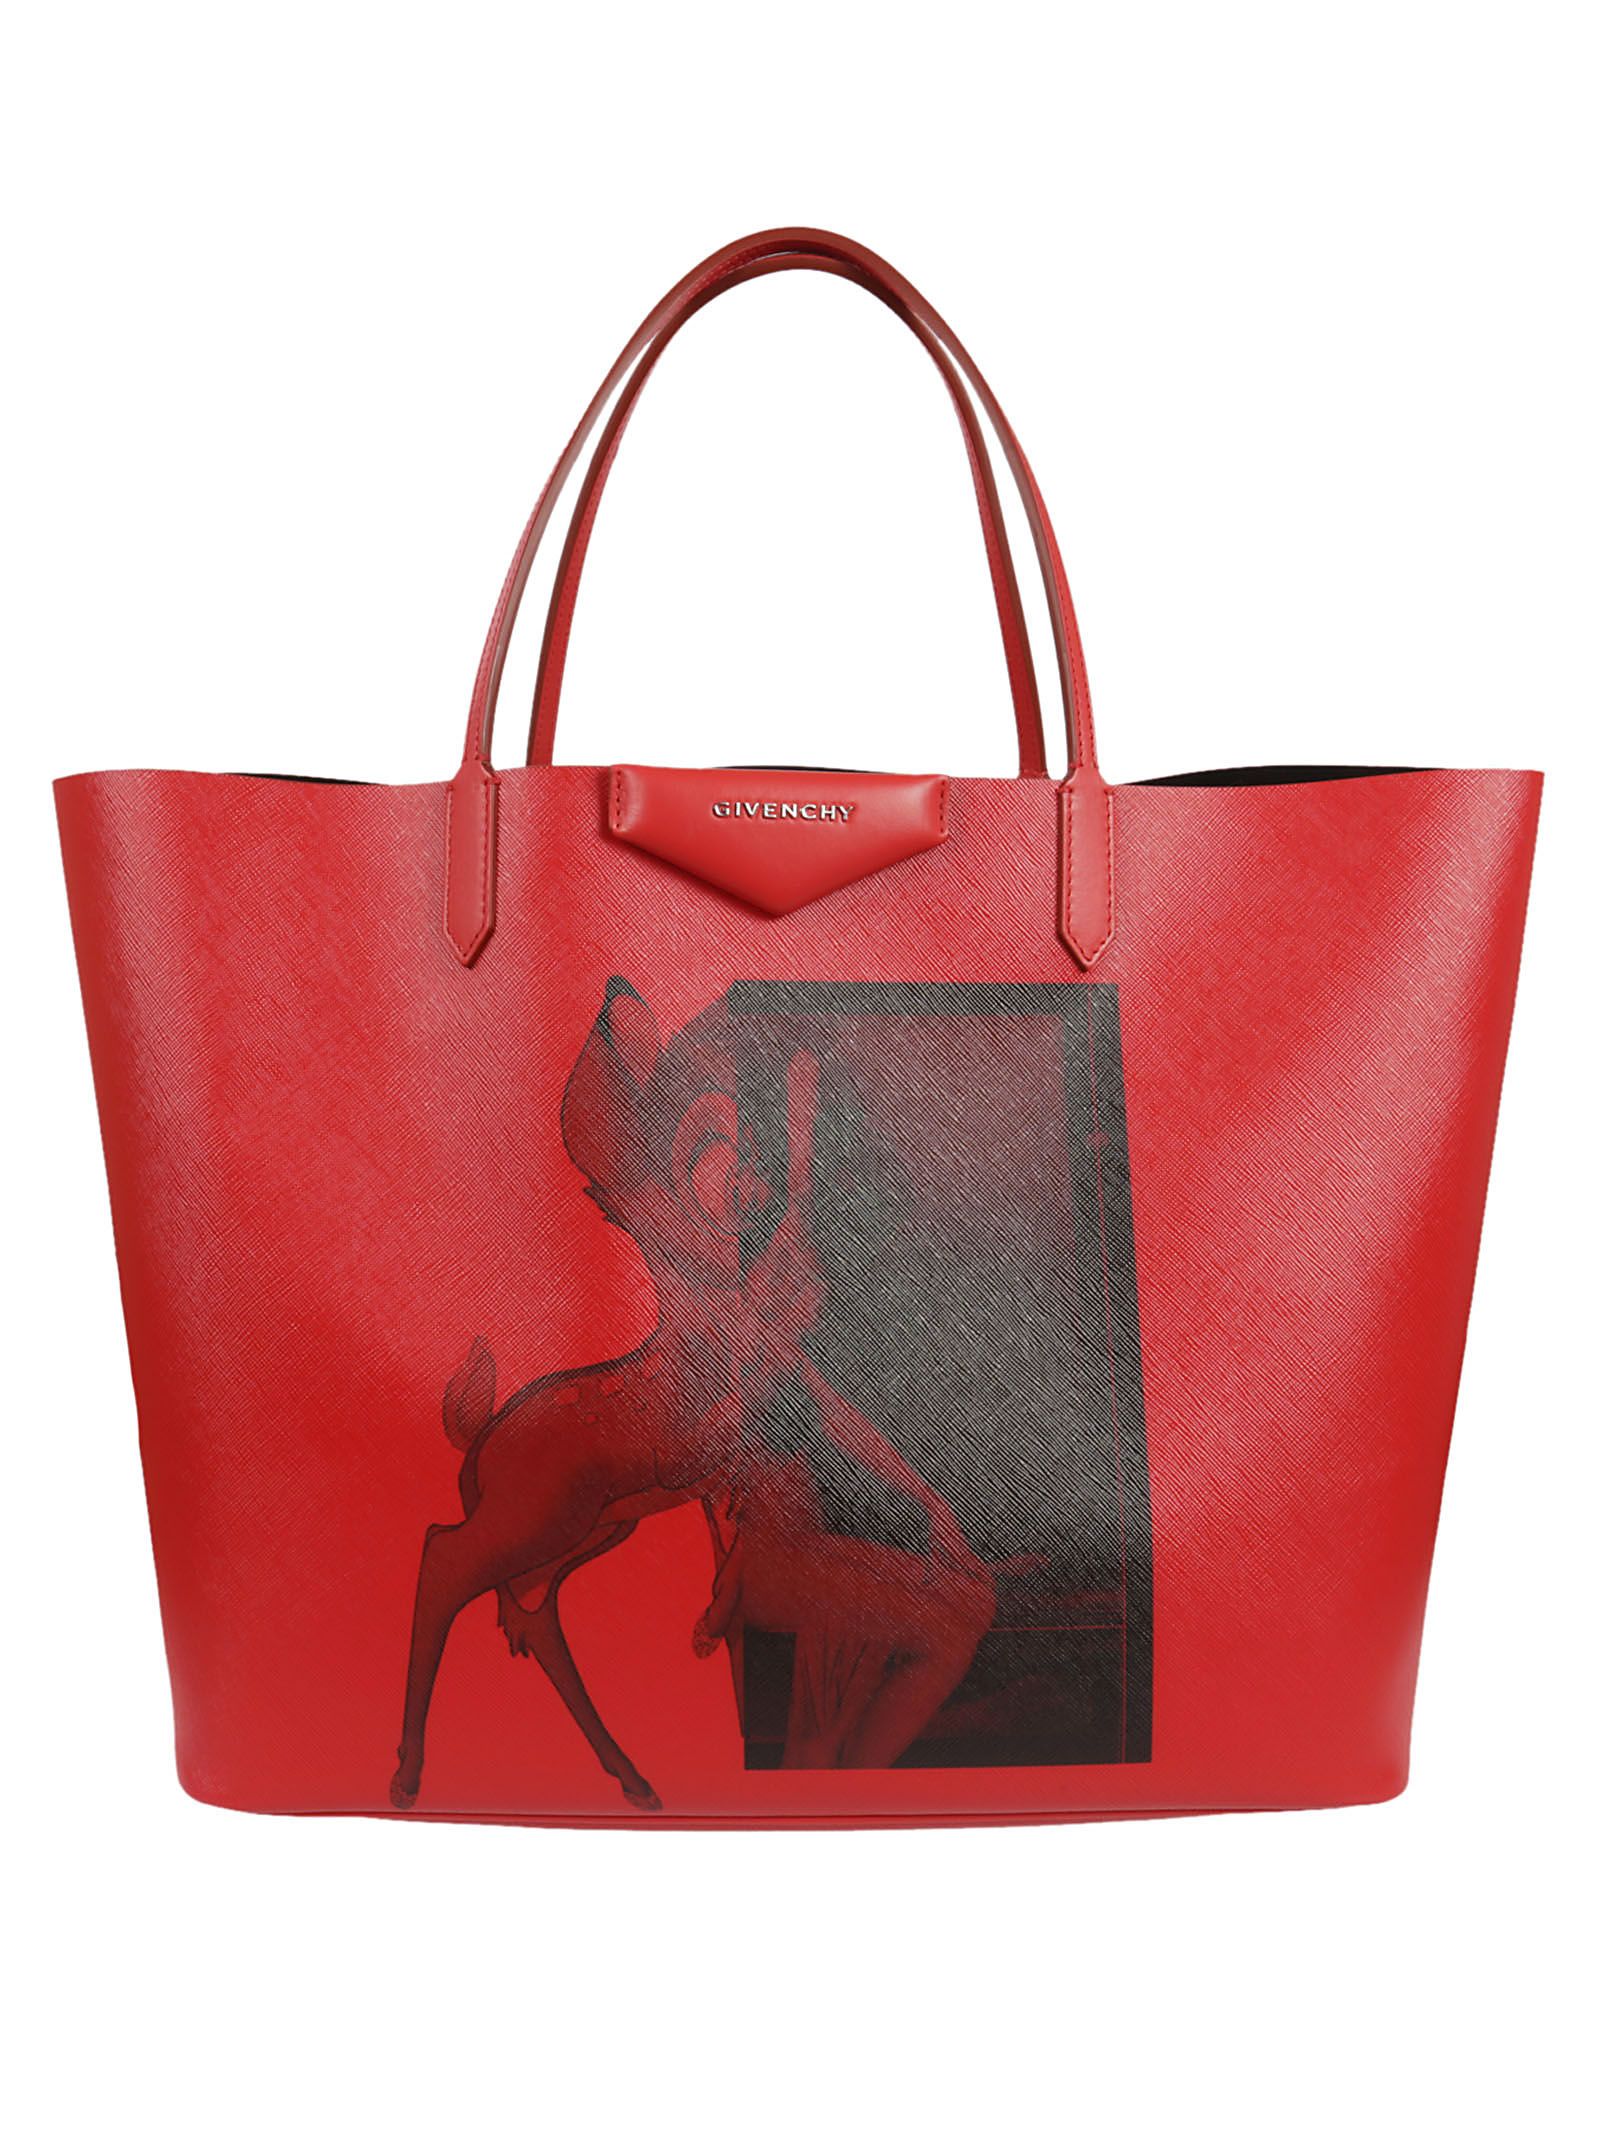 Givenchy - Givenchy Bambi Tote - Red, Women's Totes | Italist